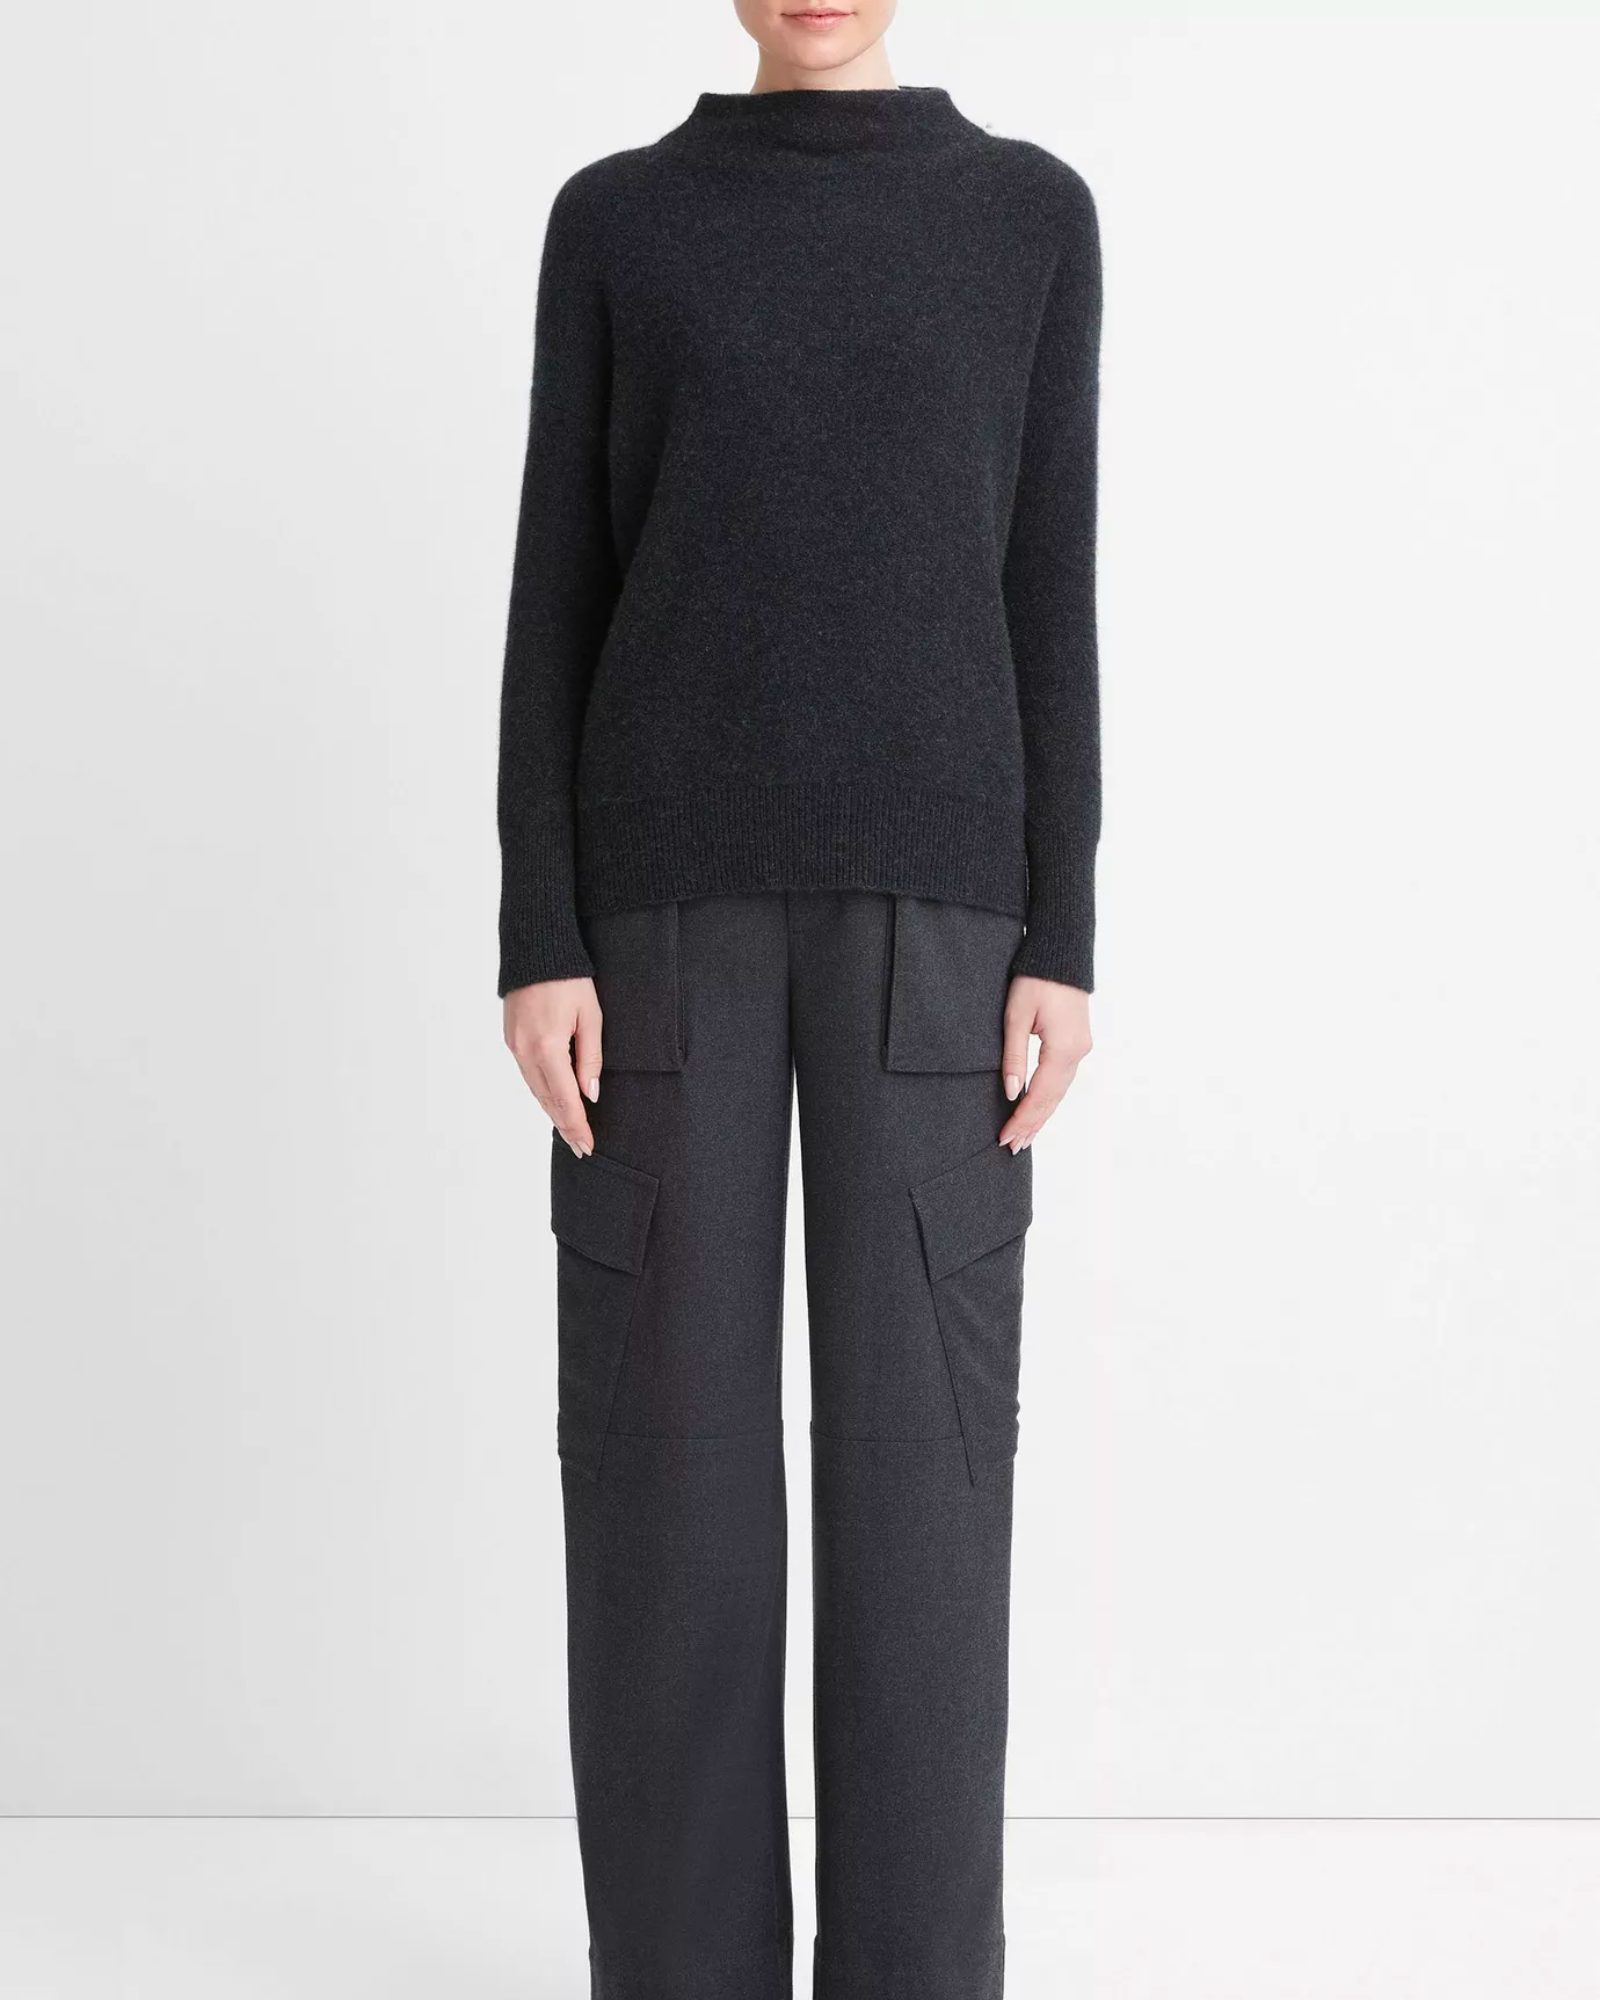 Vince Funnel Neck Sweater in Heather Charcoal